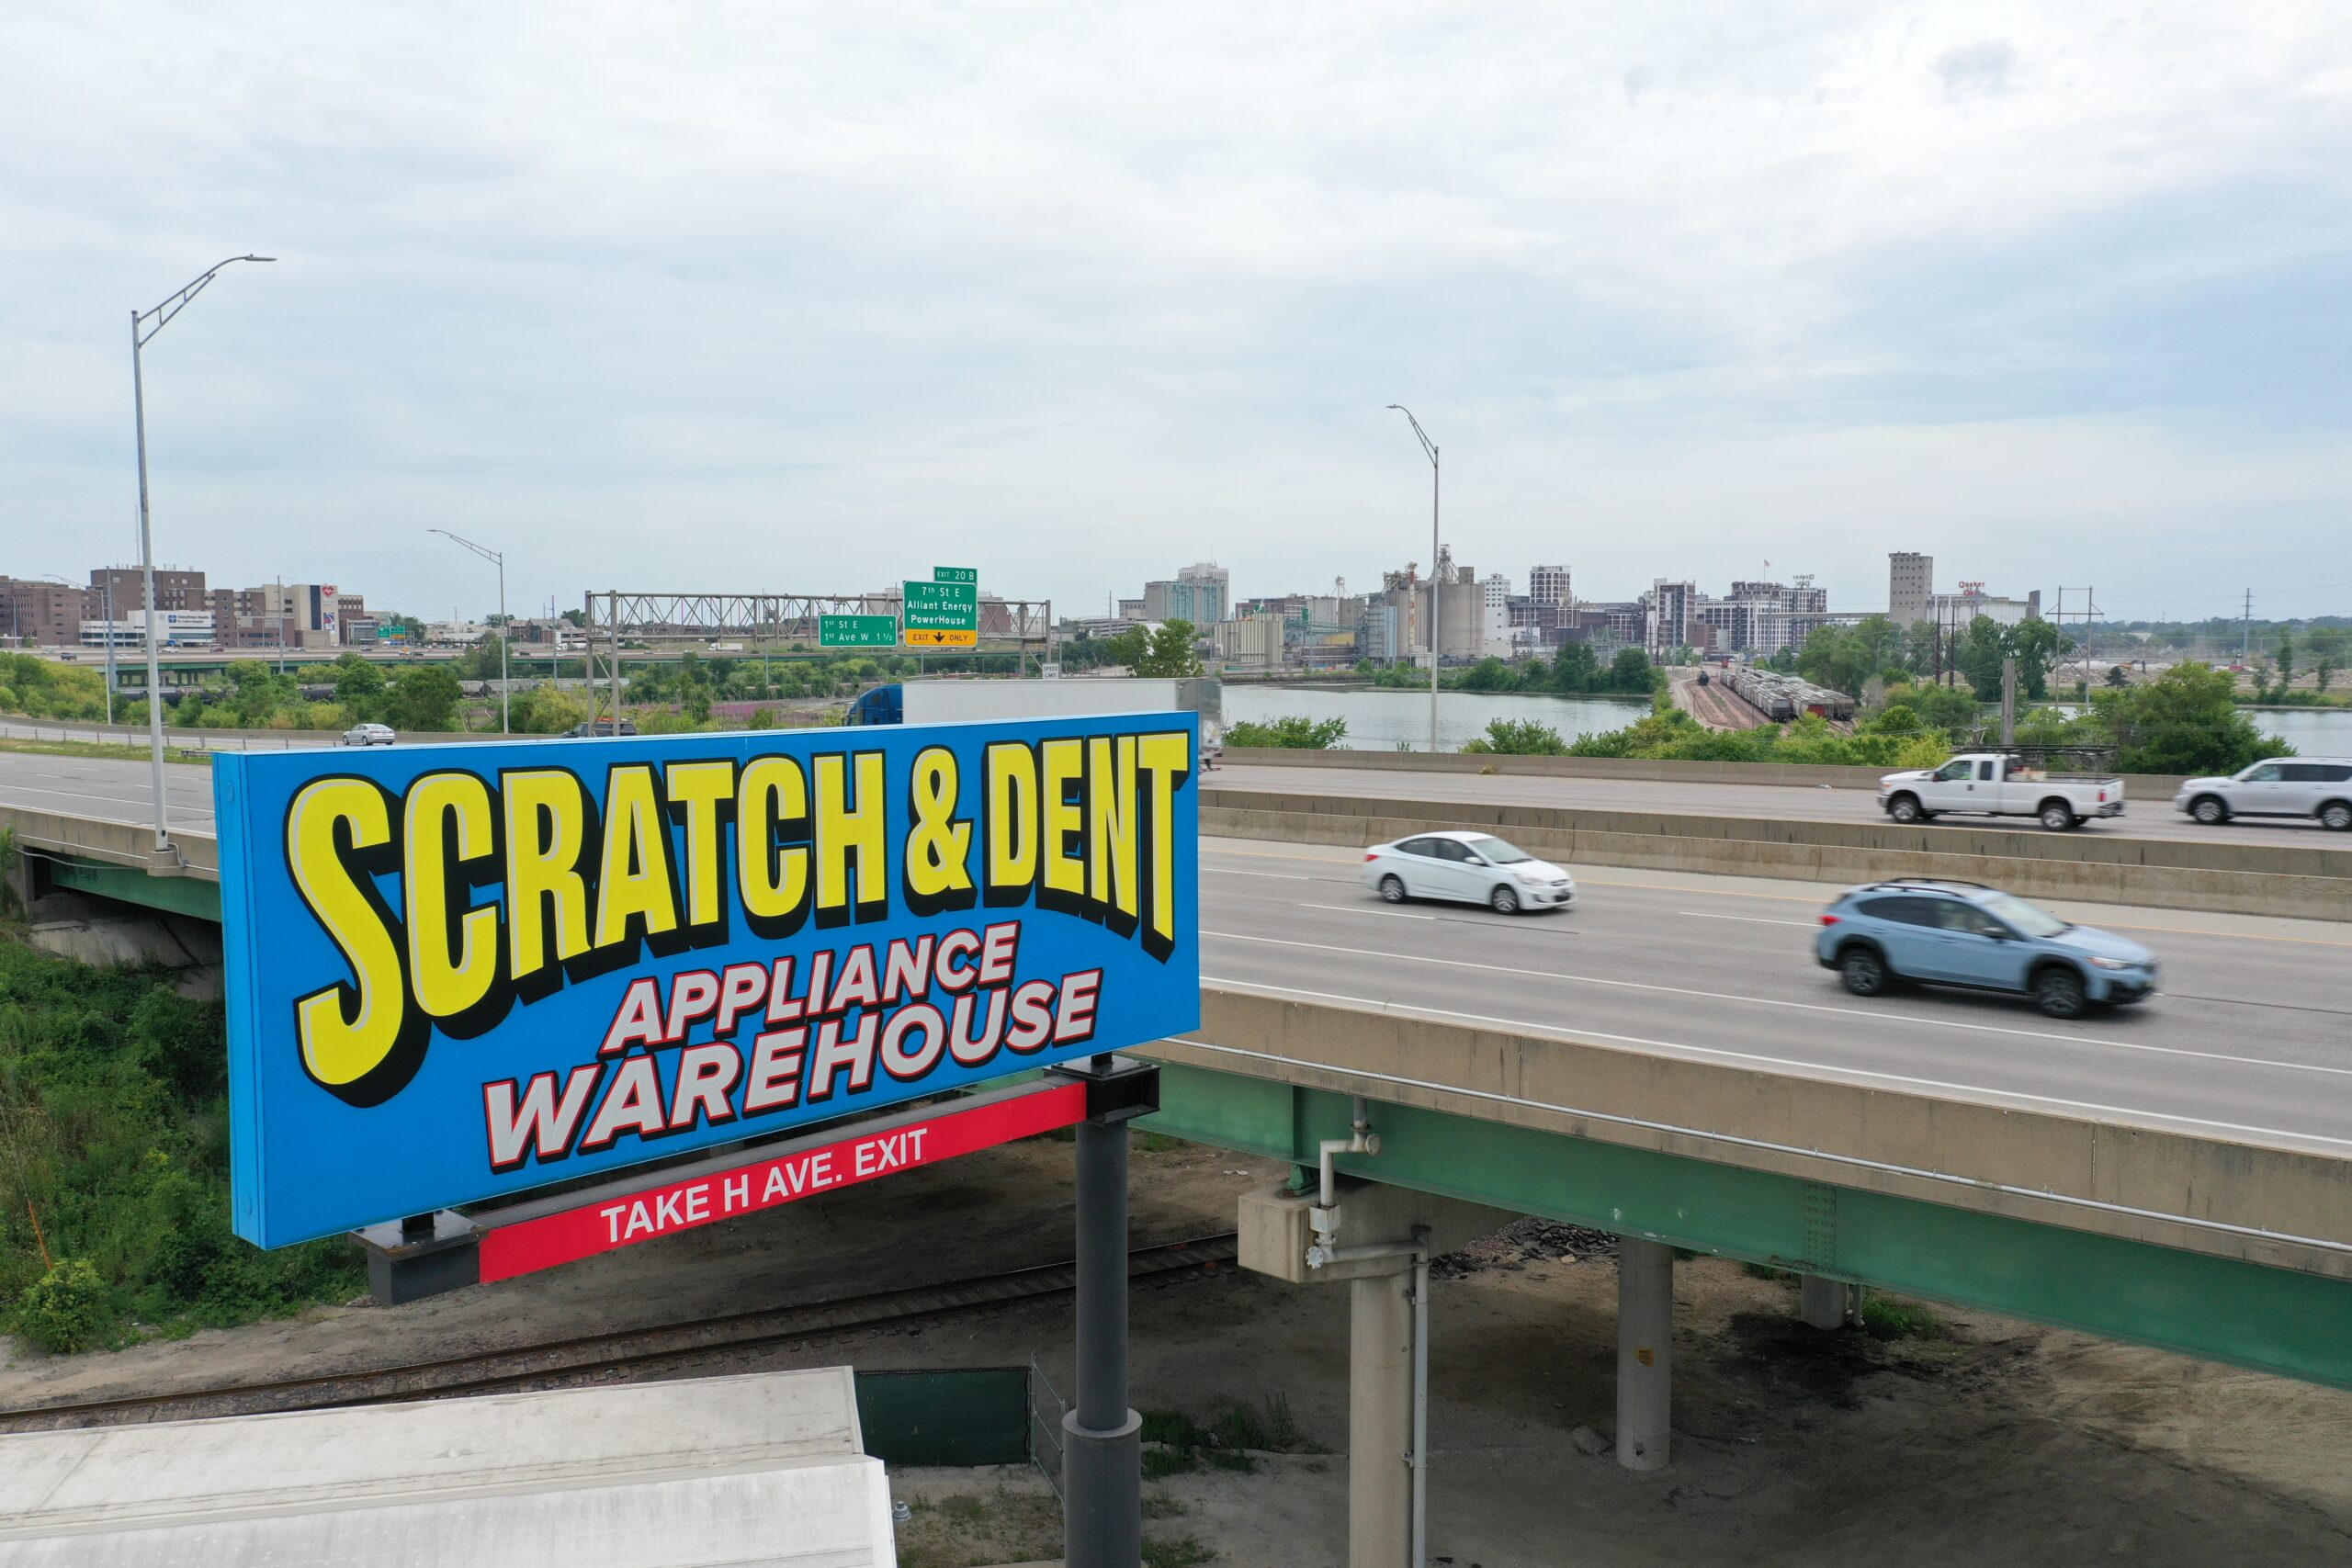 Welcome to Scratch & Dent Appliance Warehouse